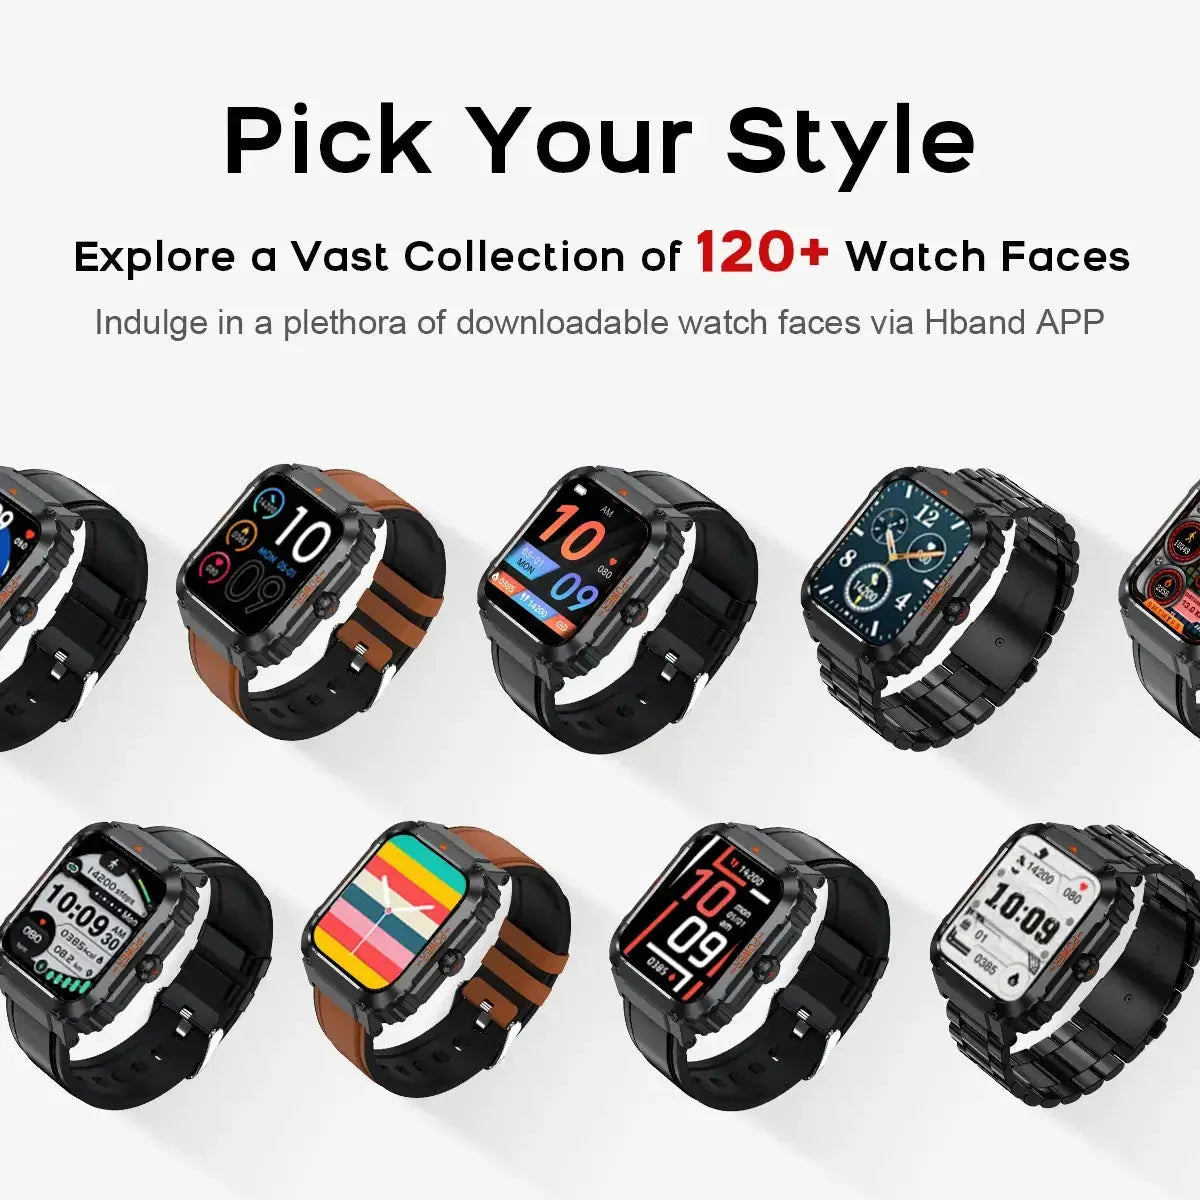 Tousains smartwatch S1 with 120+ watch faces